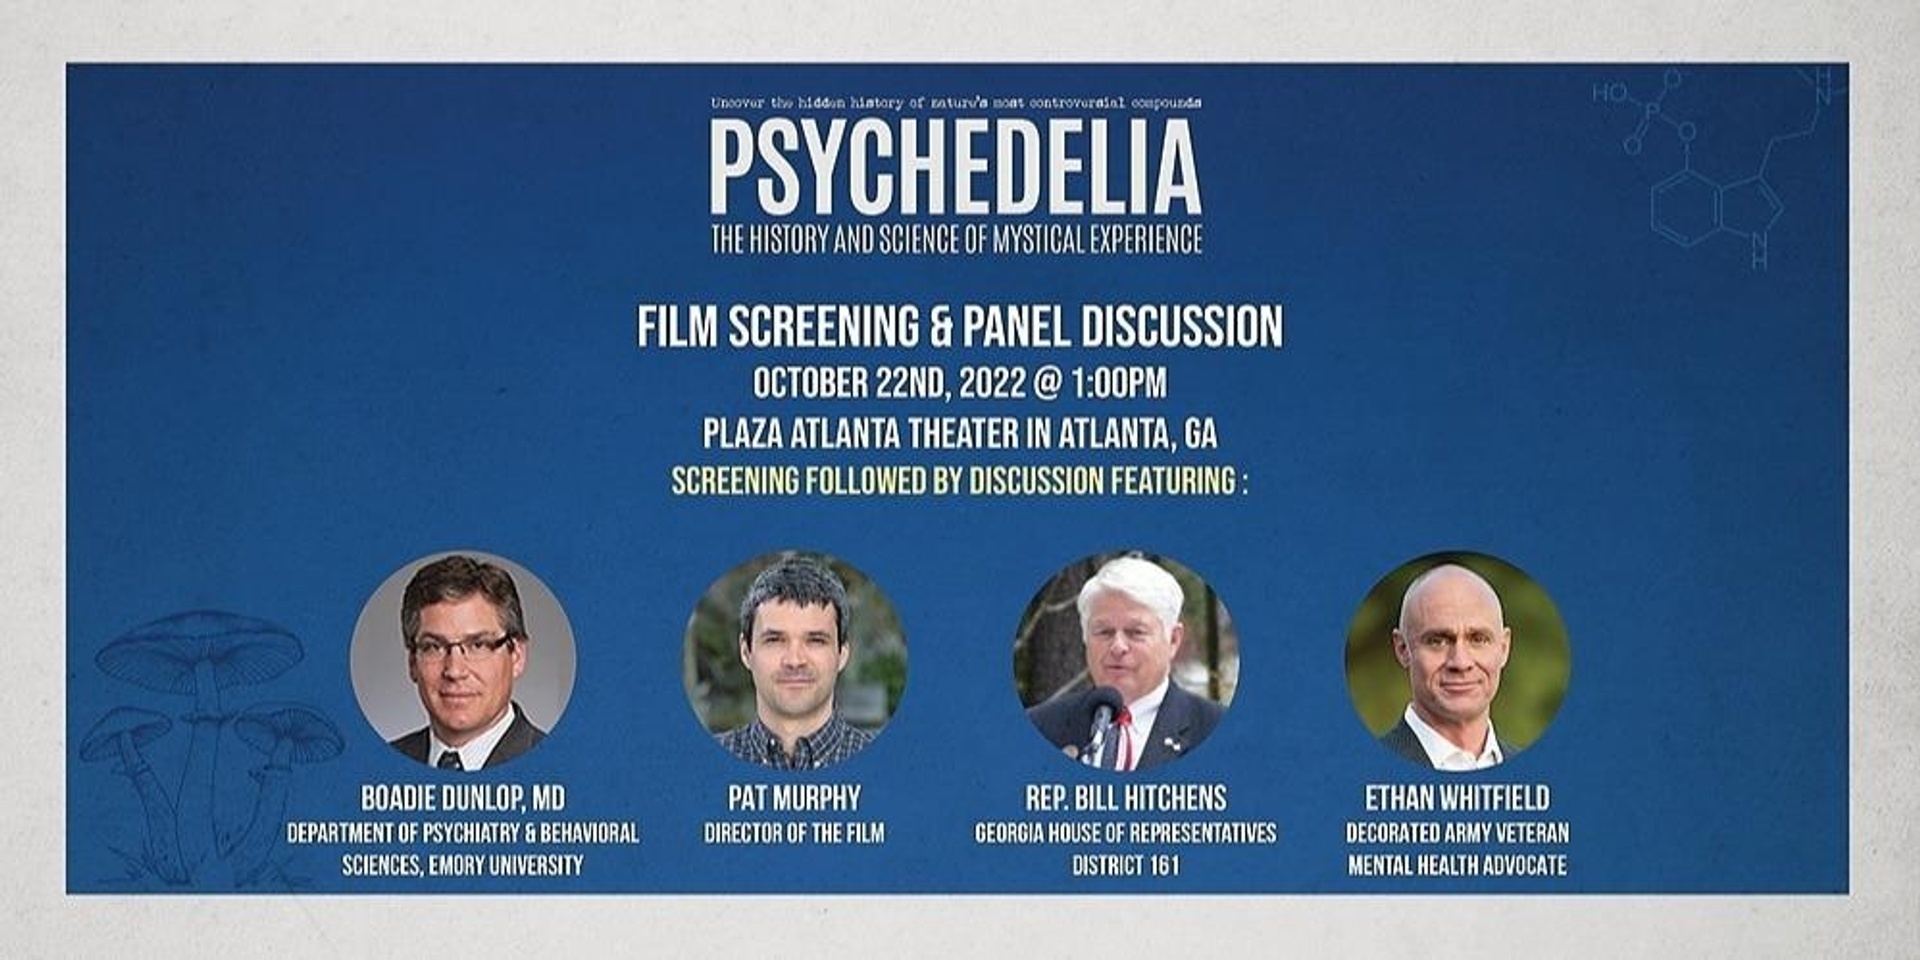 "Psychedelia" Screening & Panel Discussion in Atlanta Oct. 22nd